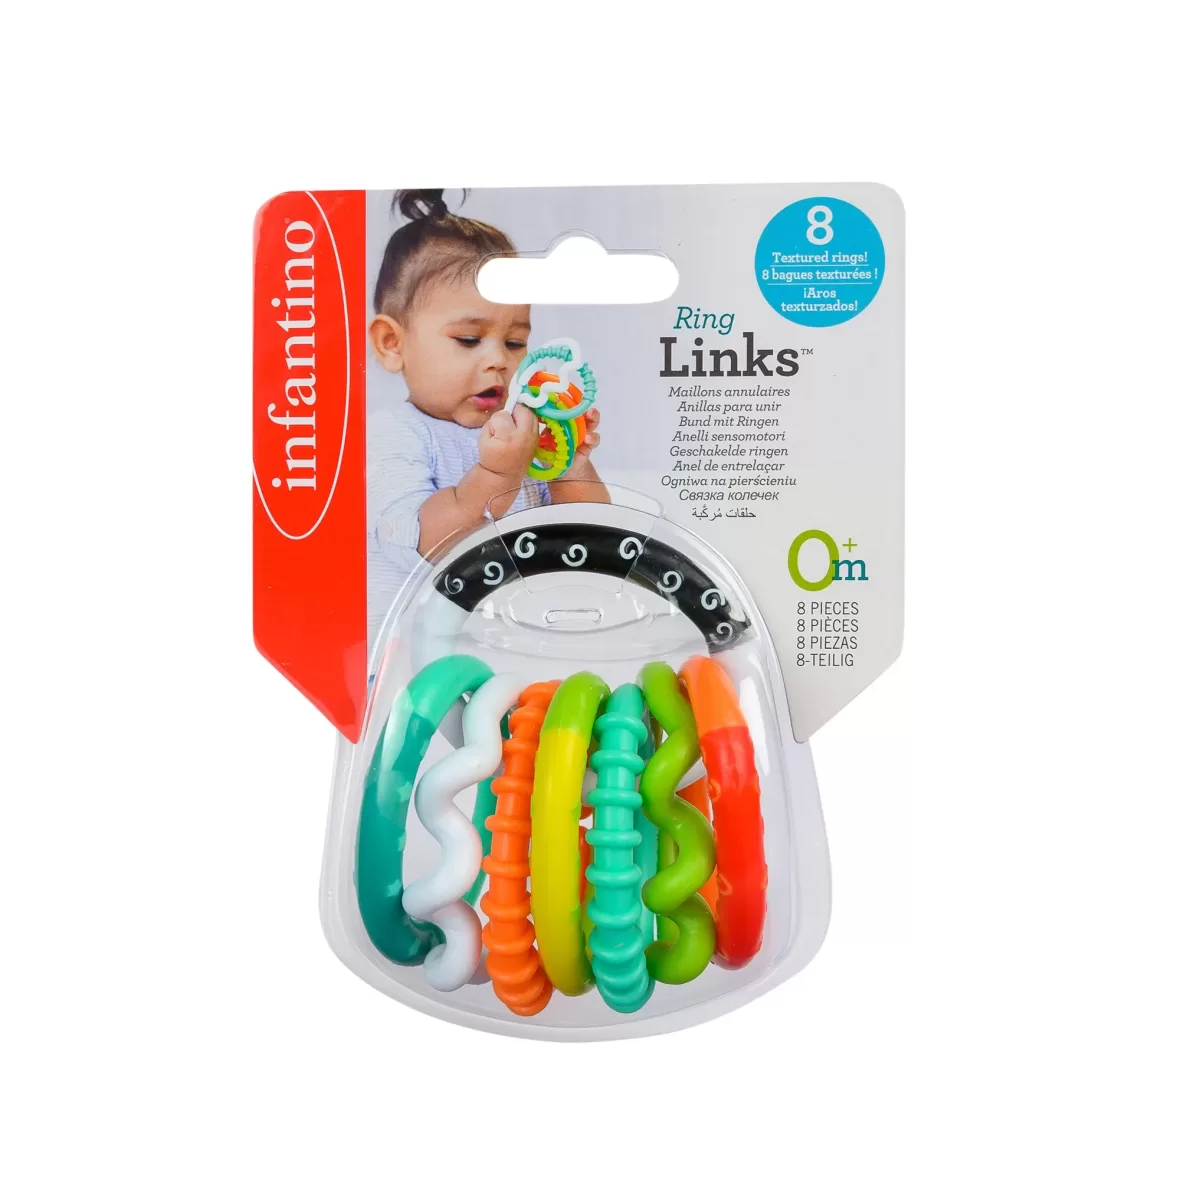 Infantino_Textured Ring Links_1